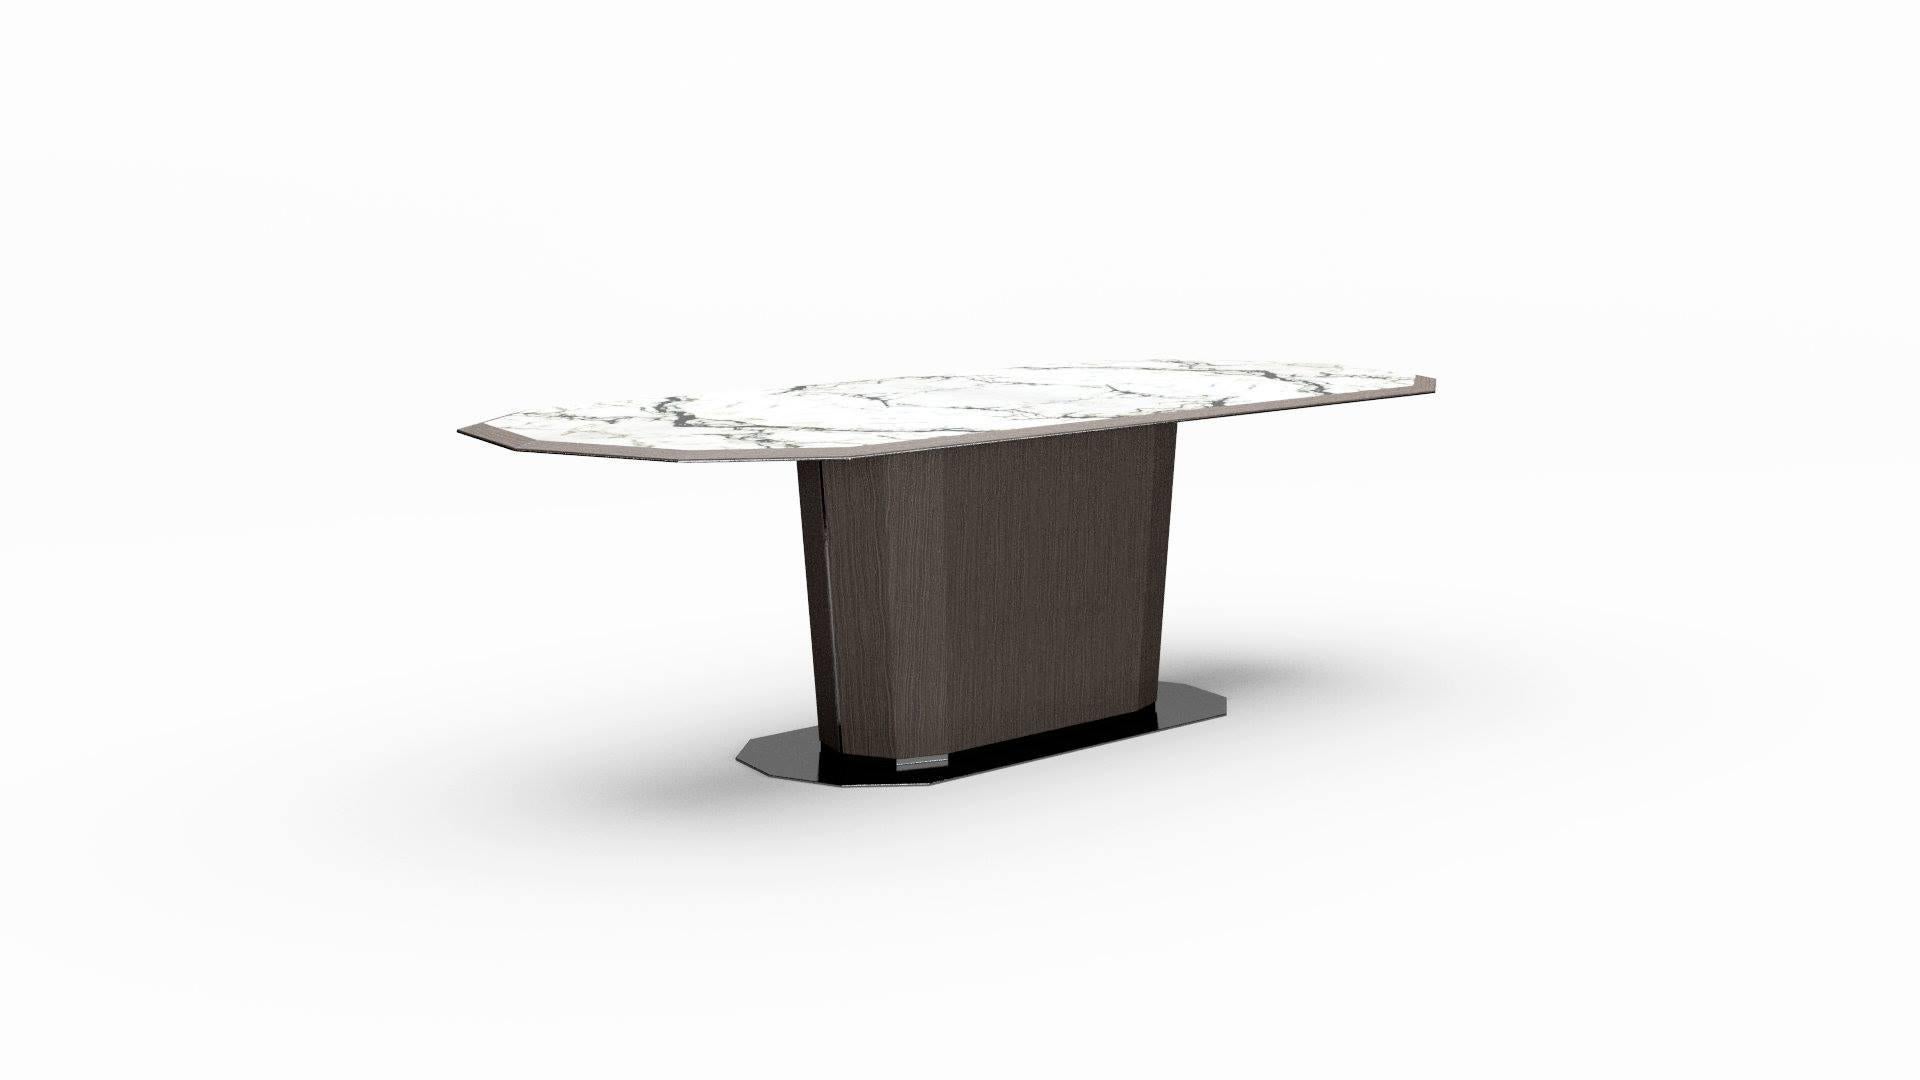 In the context of interior design, a marble or glass dining table is not just a piece of furniture but becomes the centerpiece of the entire home, an element that invites gathering, sharing, and celebrating the moments experienced around it.
It is